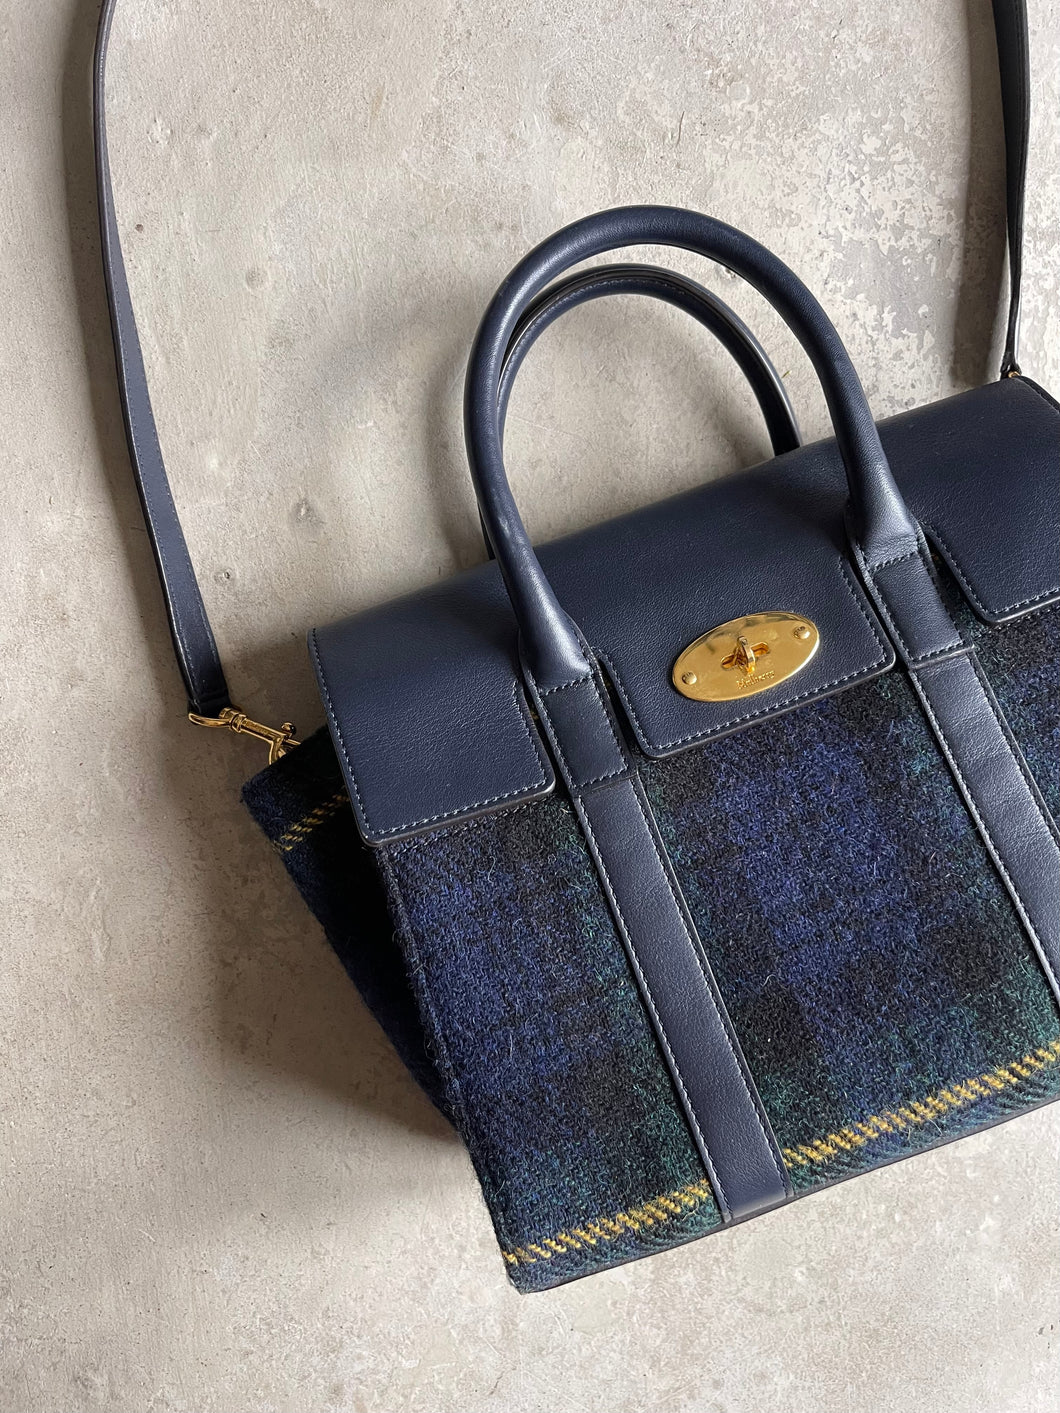 Mulberry Checkend Bag